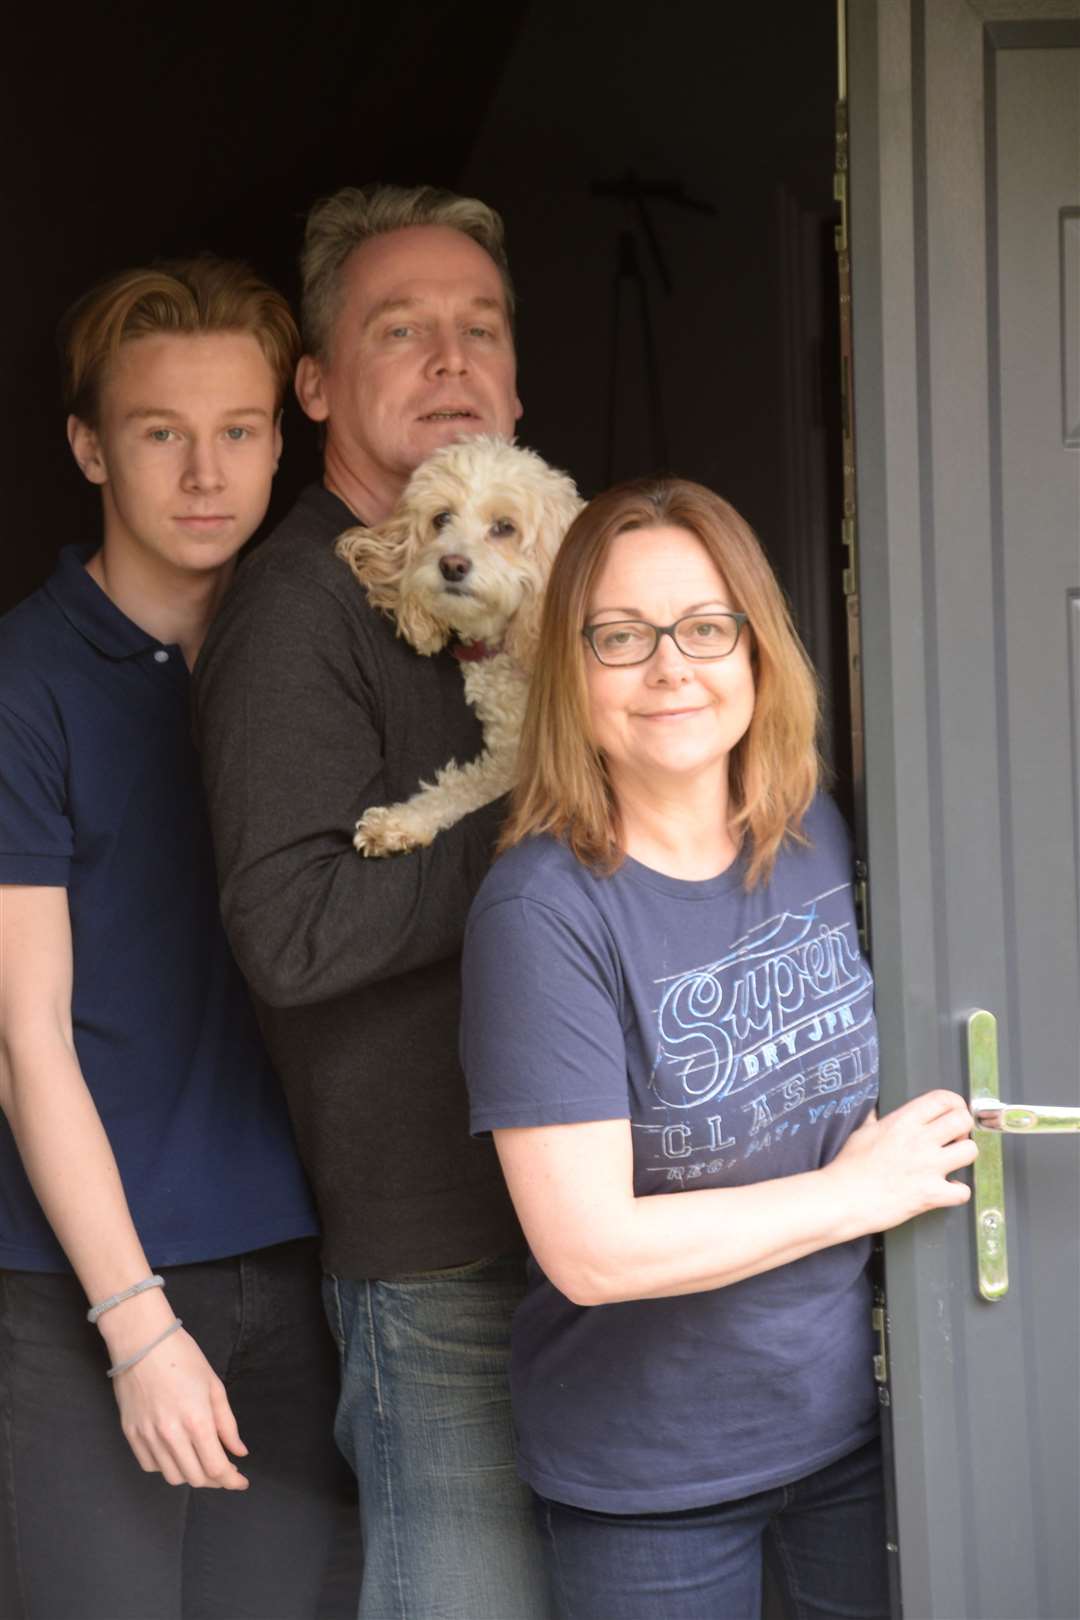 The Wilson family coping with lockdown – Cate with husband Scott, son Jacob and Lily Pickle the dog. Picture: Vikki Lince (33947596)